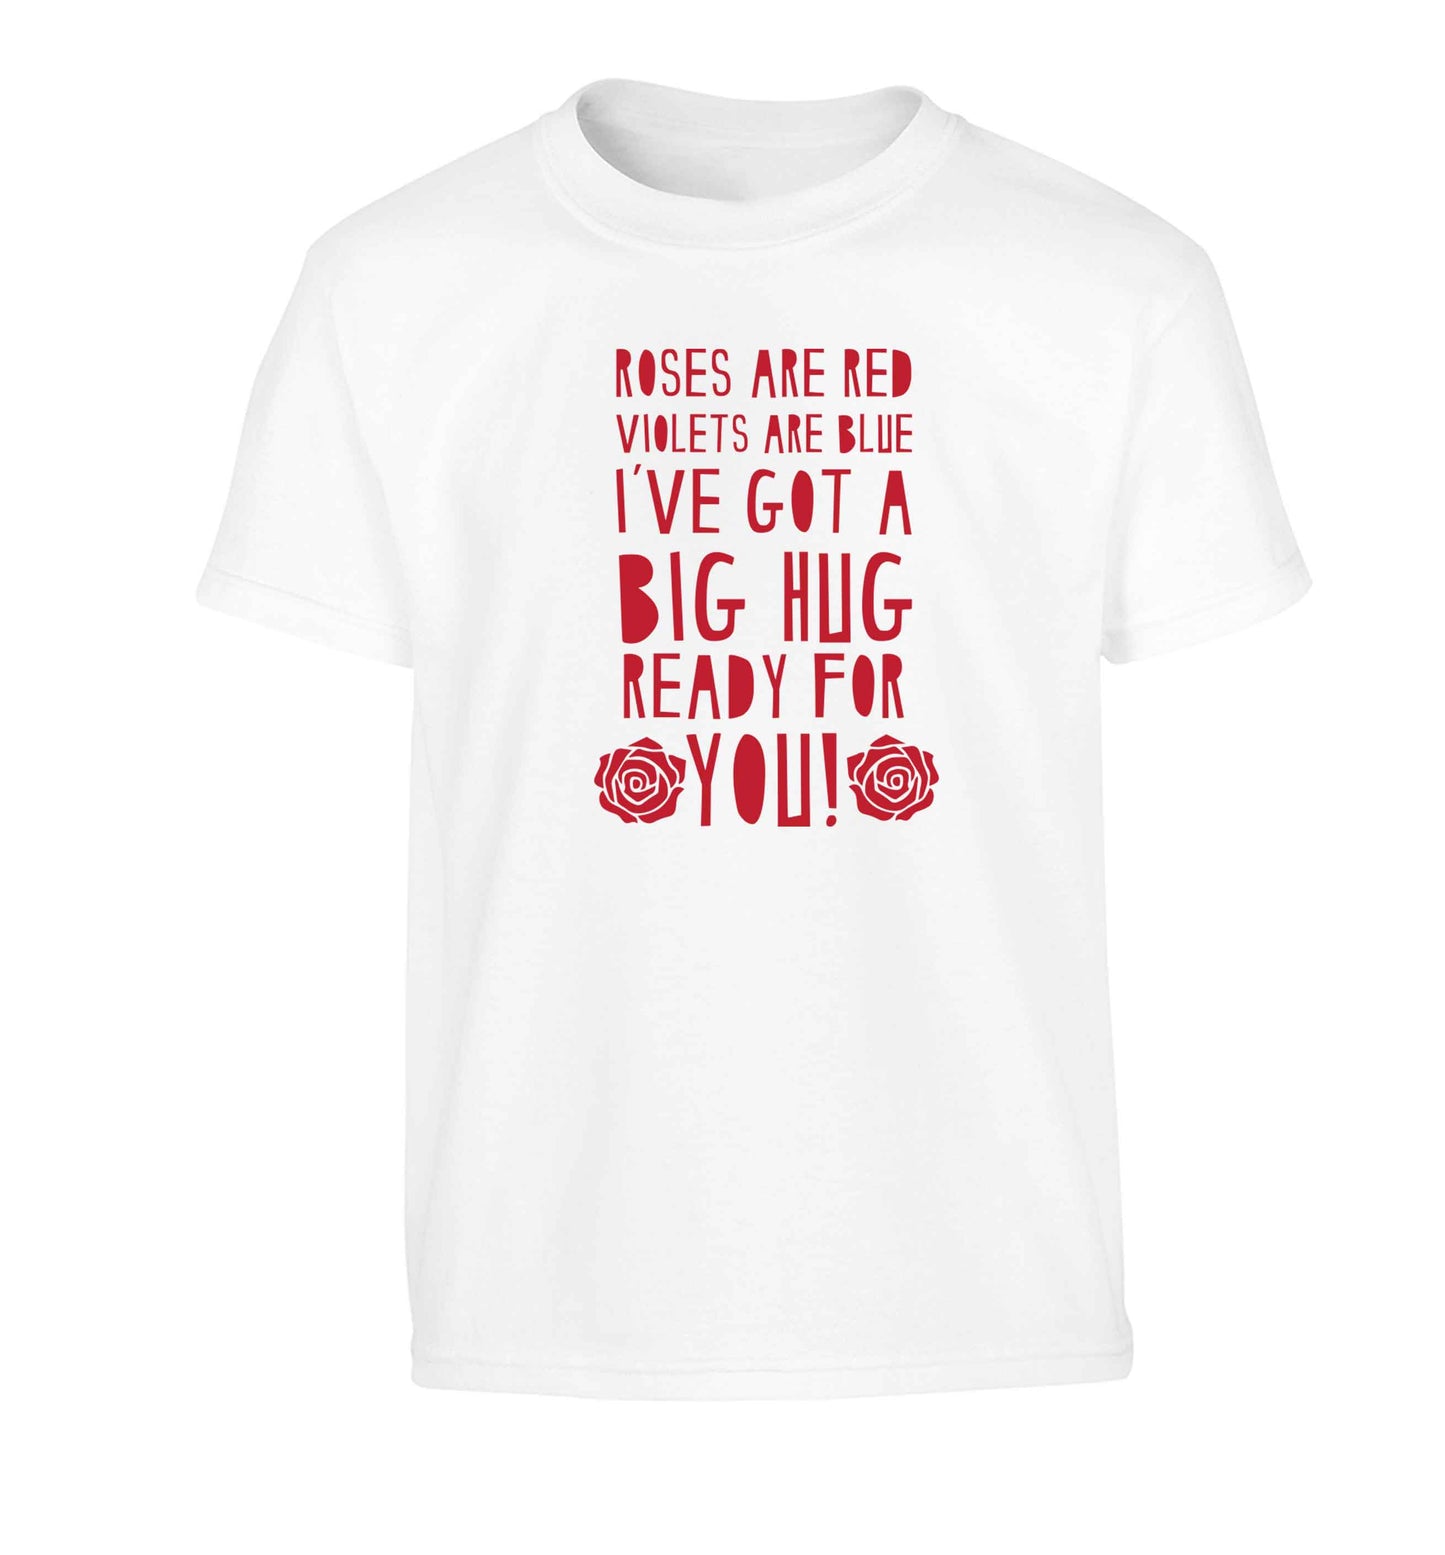 Roses are red violets are blue I've got a big hug coming for you Children's white Tshirt 12-13 Years